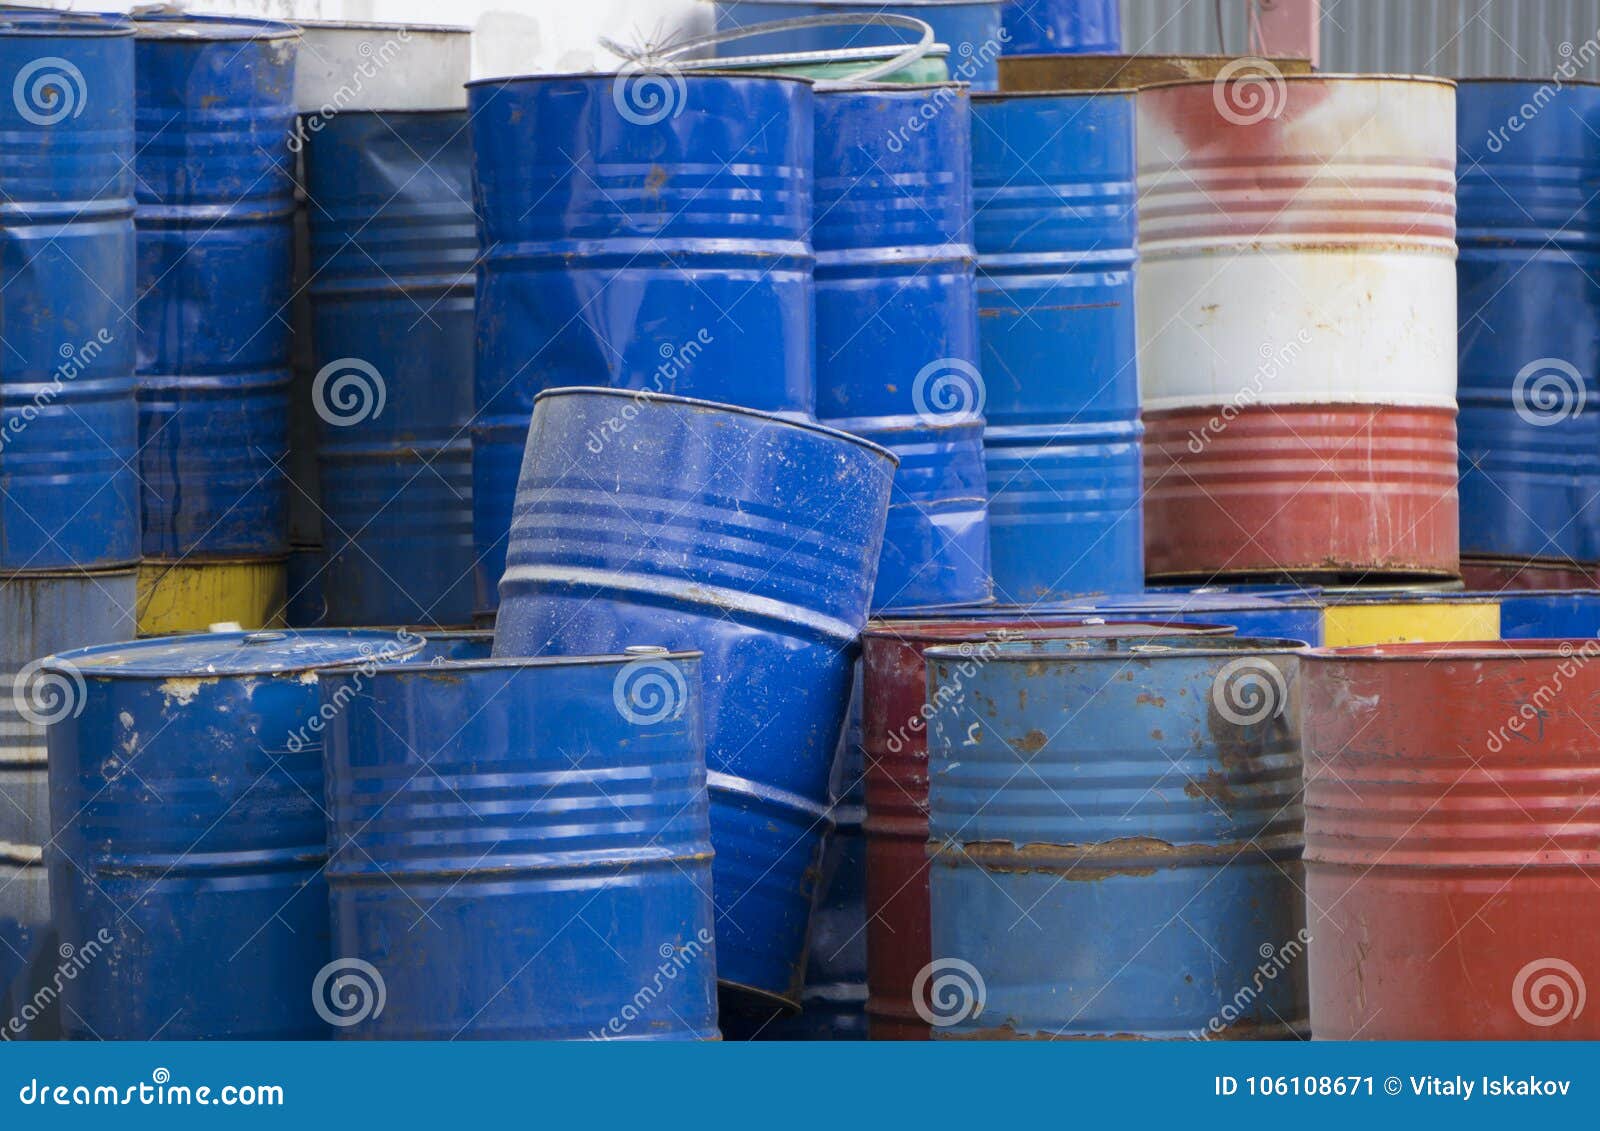 Front View of Many Rusty Iron Barrels. Stock Image - Image of texture